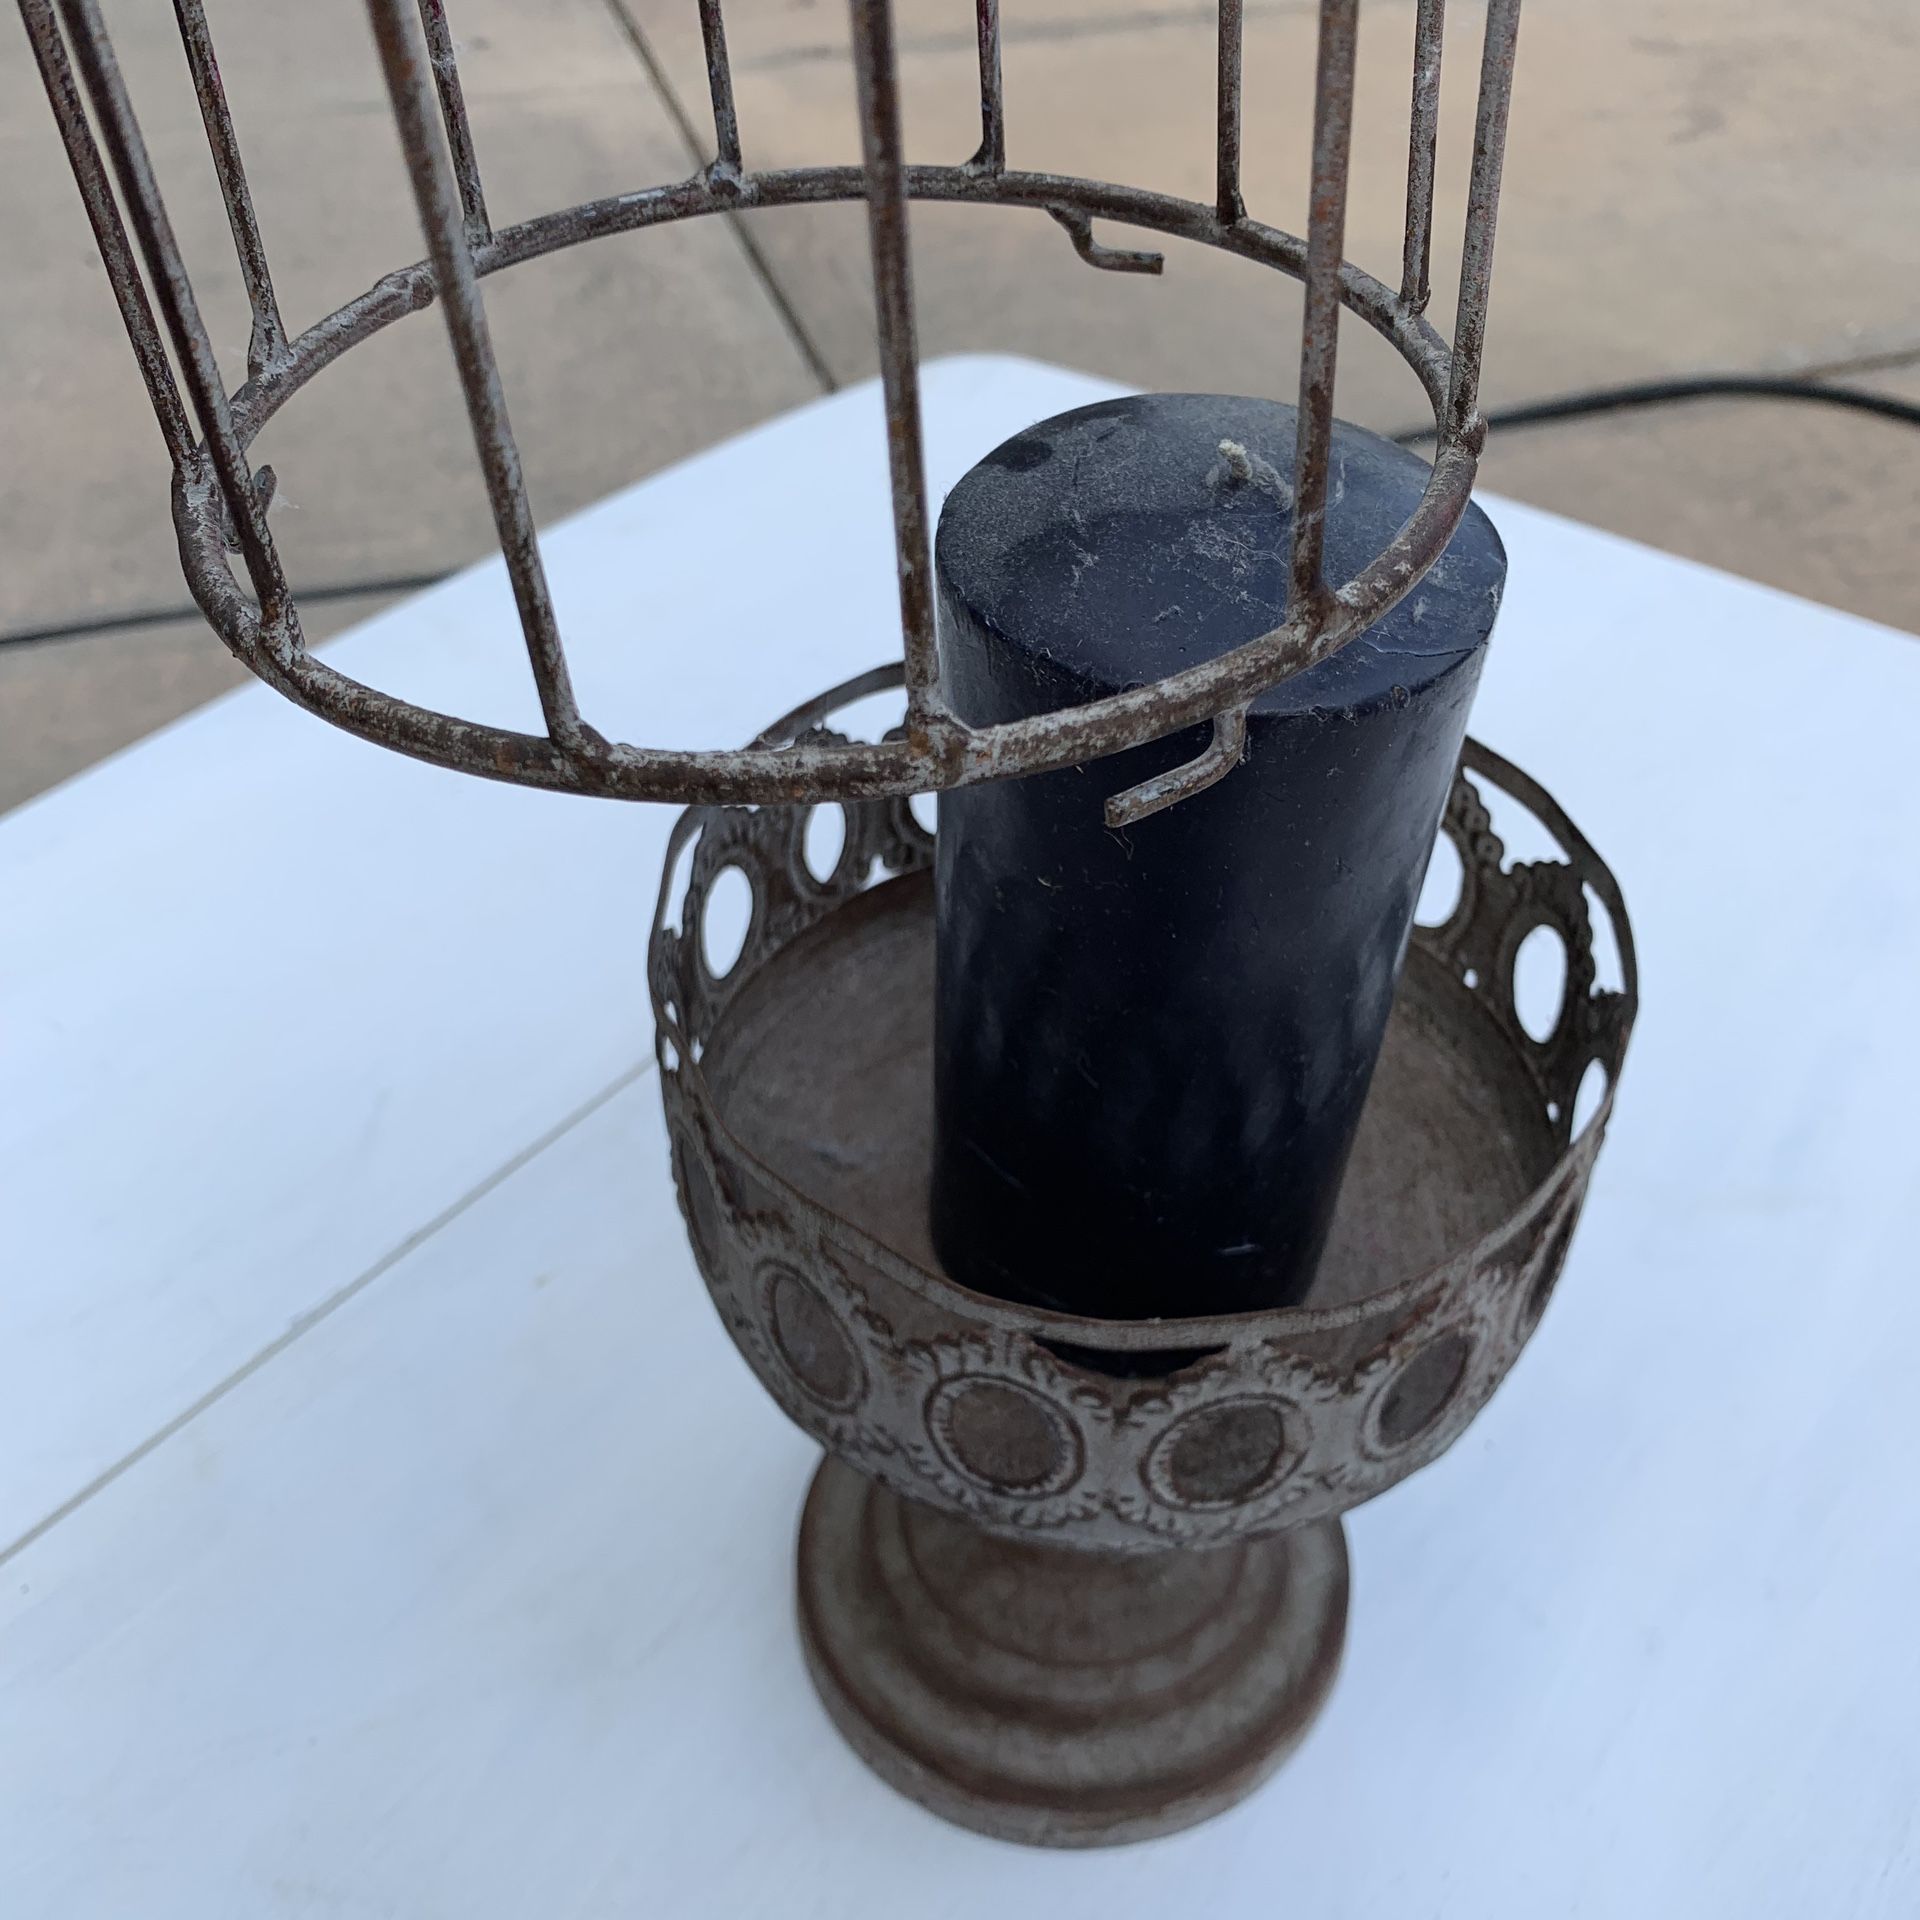 Rustic Candle Holder or Decor